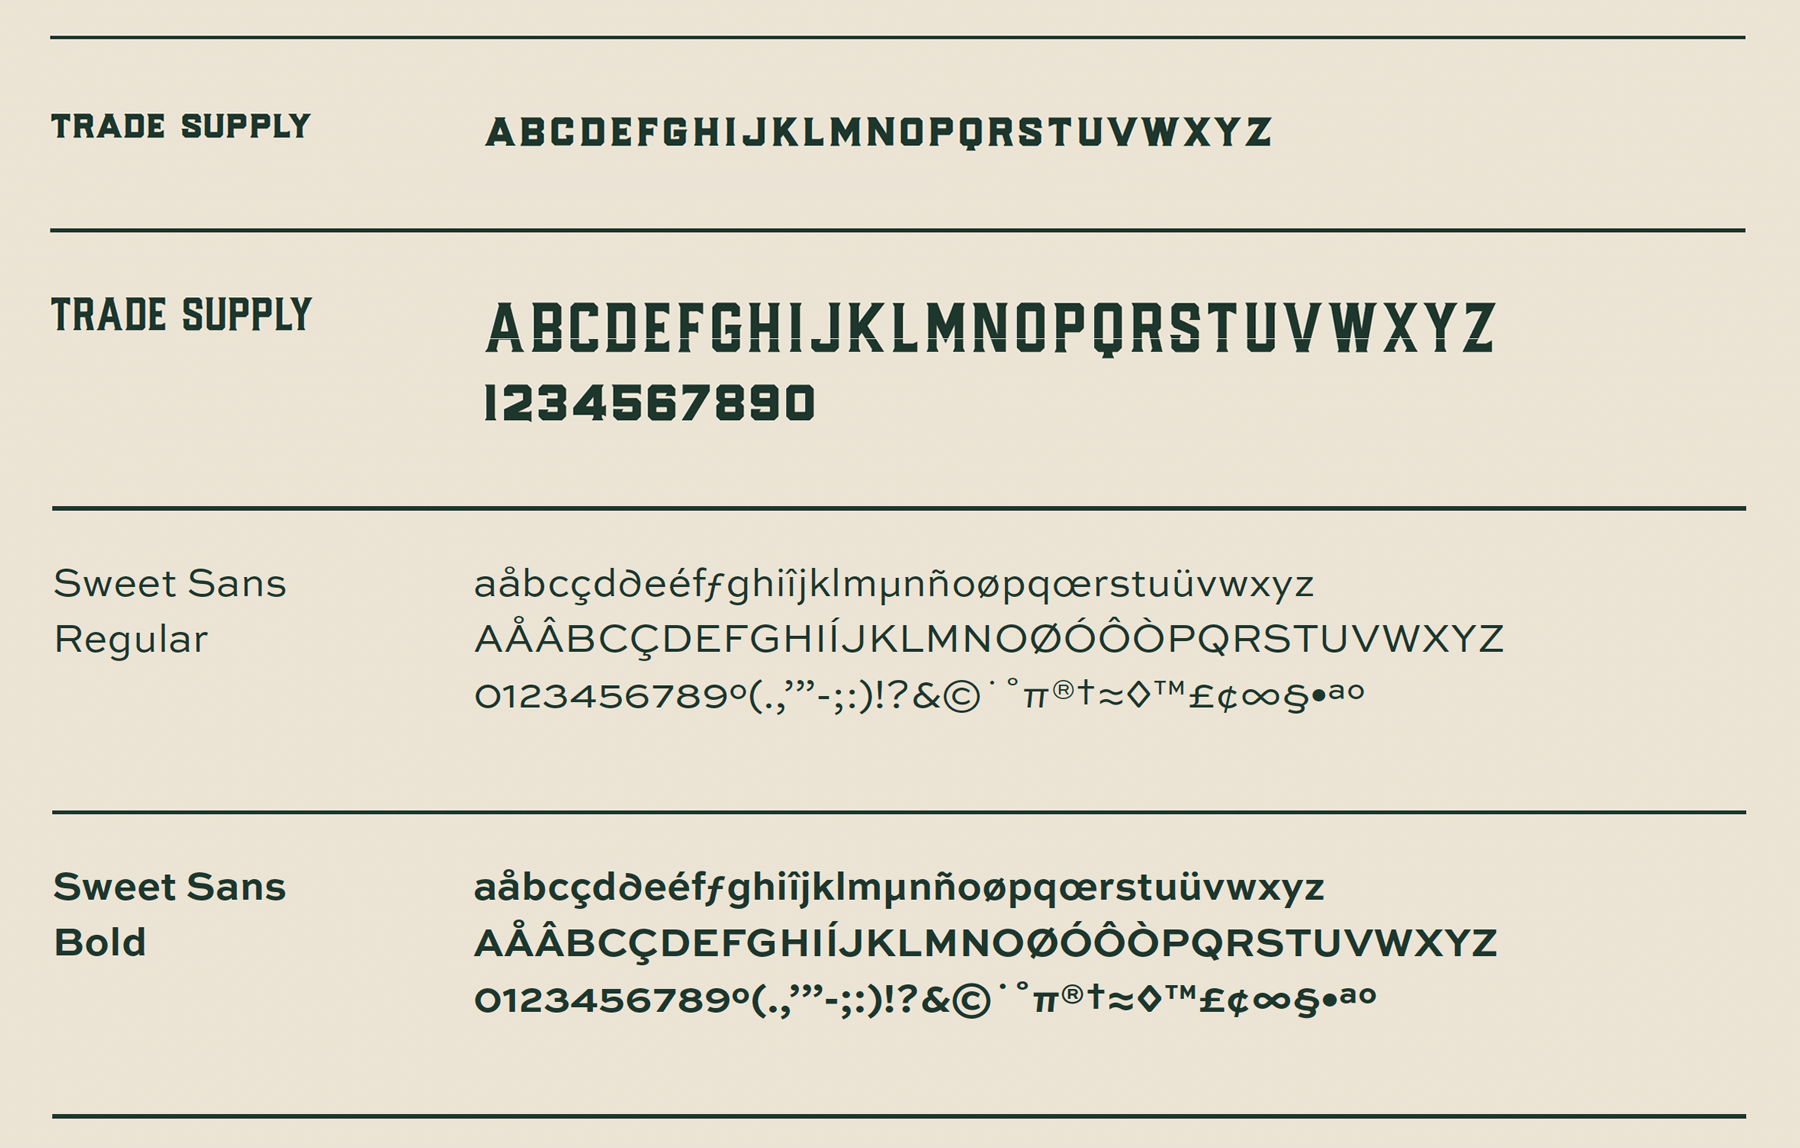 Type used for brand elements